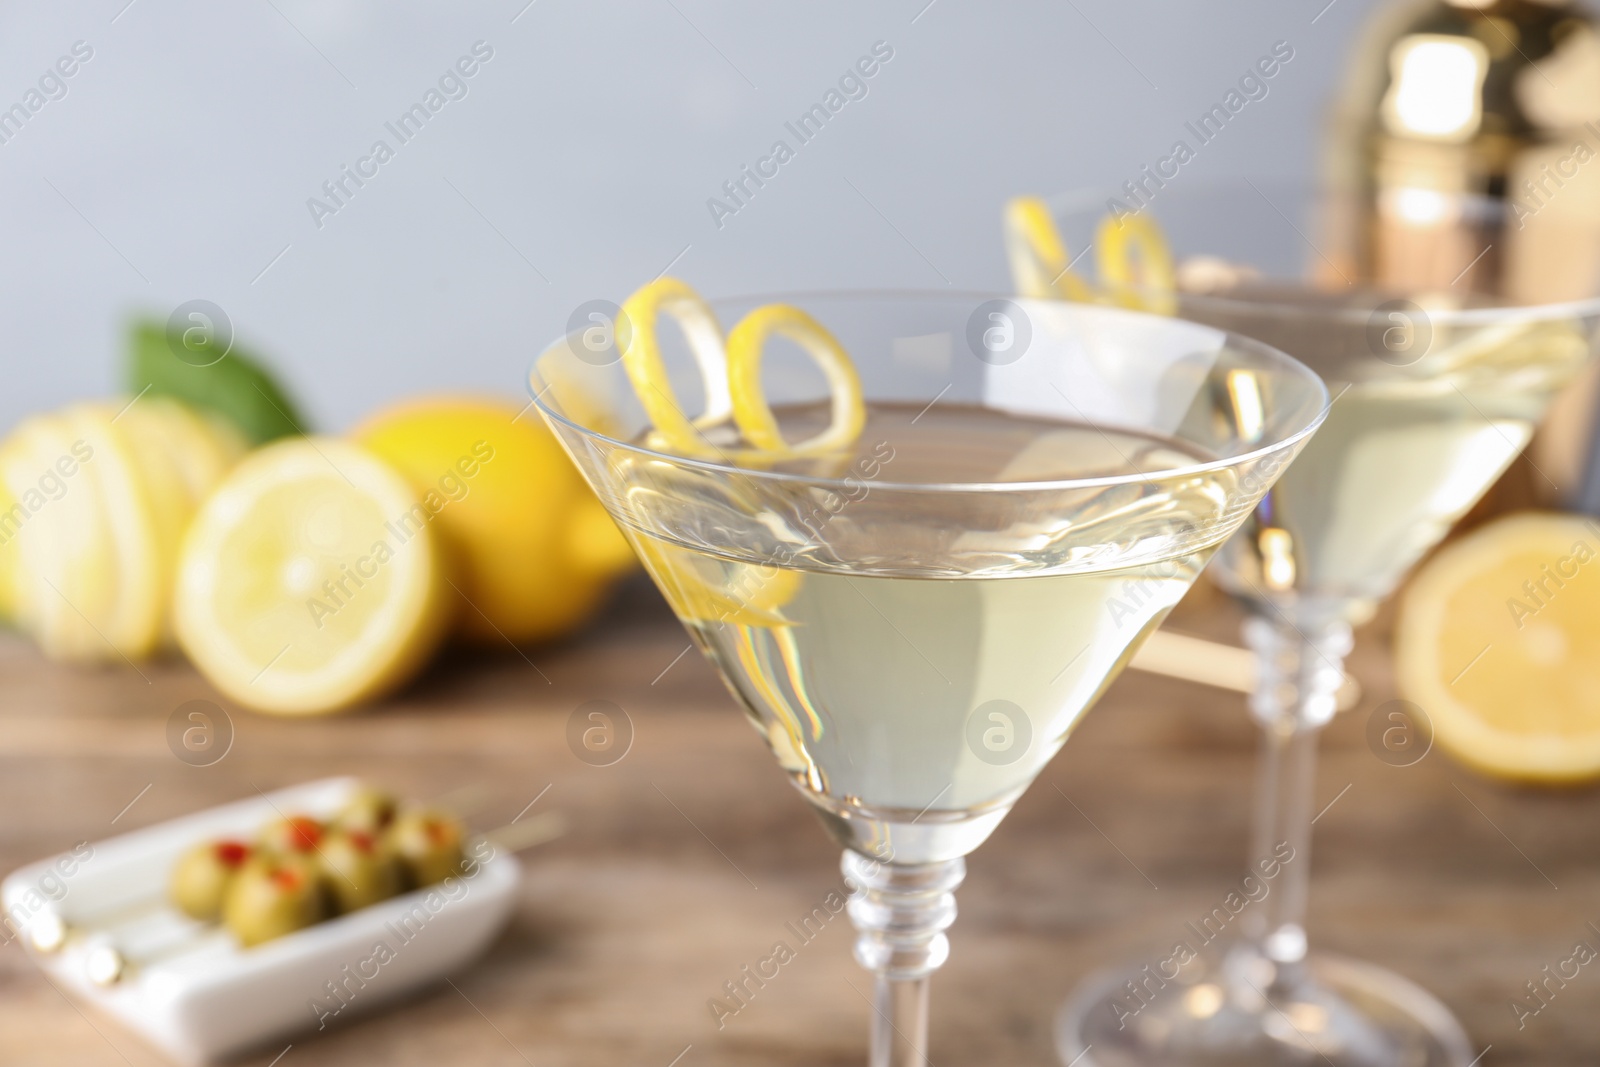 Photo of Glasses of lemon drop martini cocktail with zest on wooden table against grey background